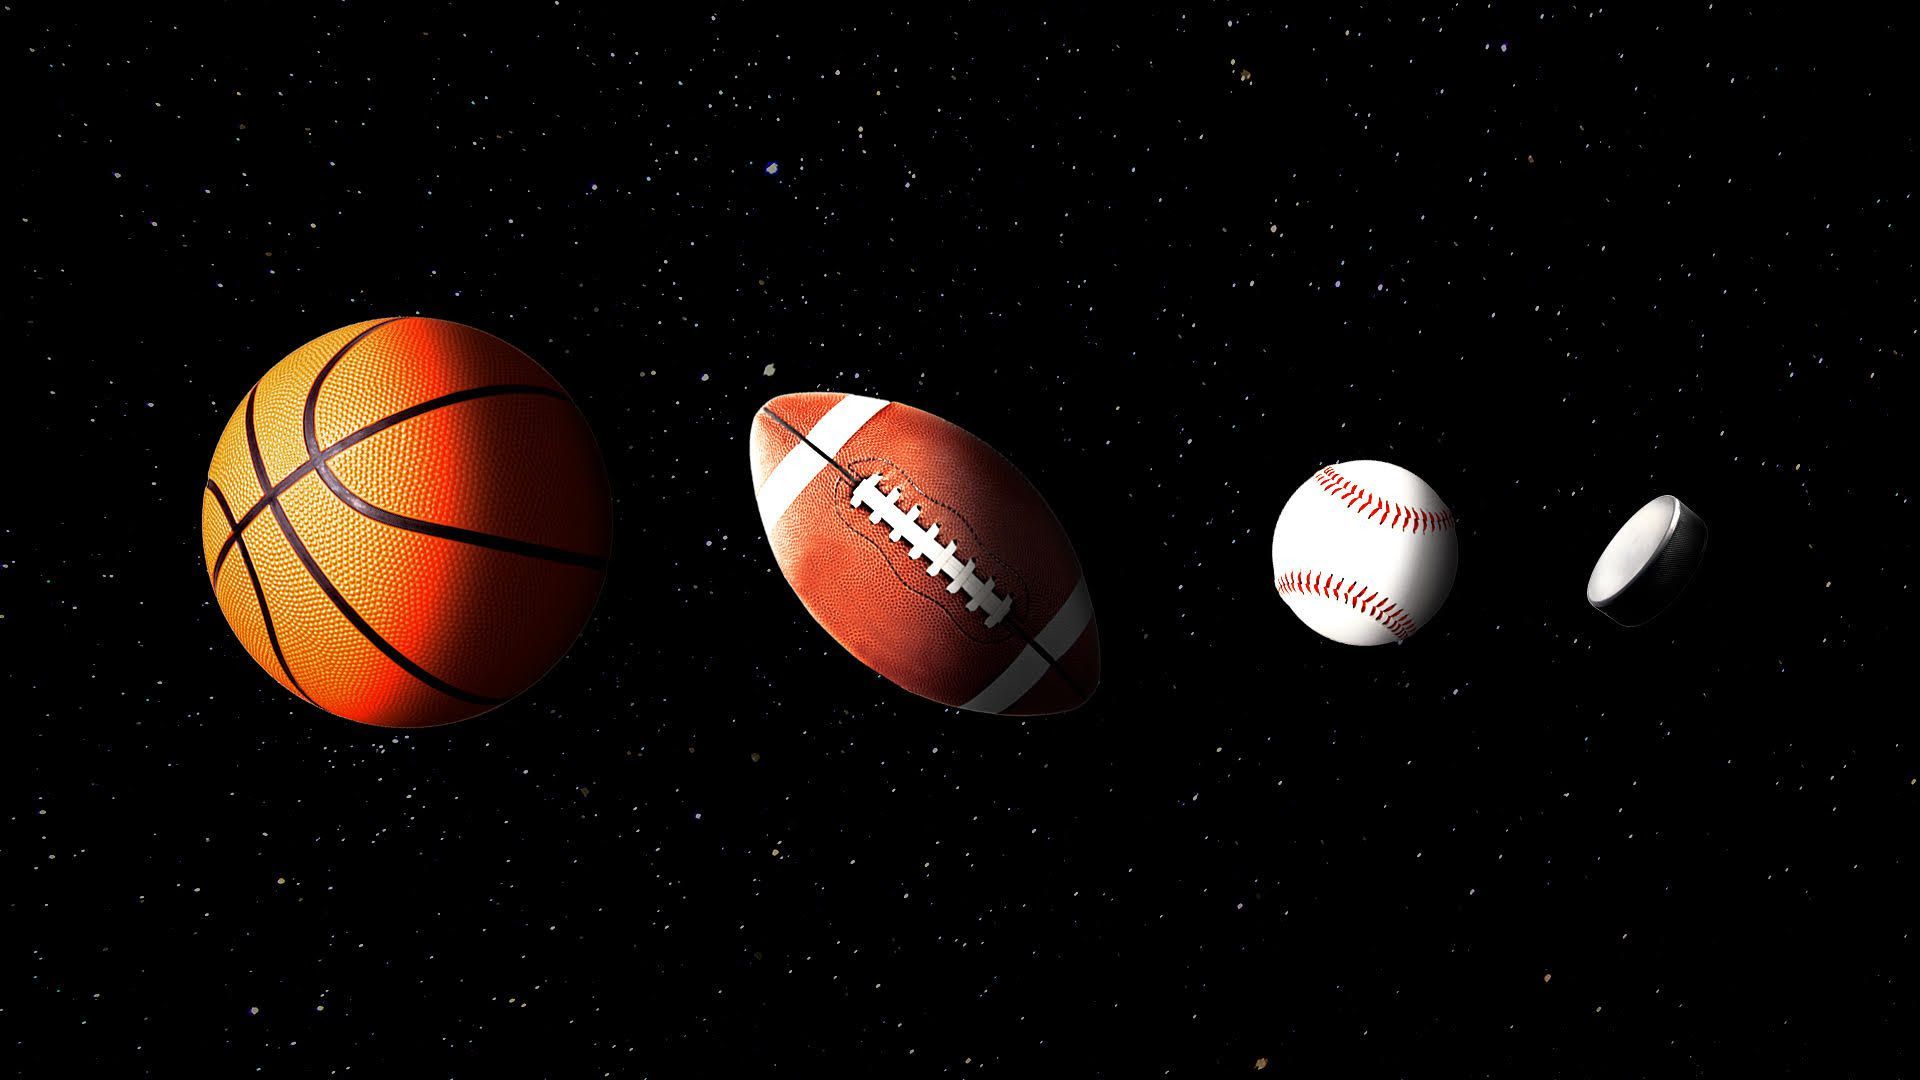 An illustration of a hockey puck, baseball, football and basketball all aligning like planets in space